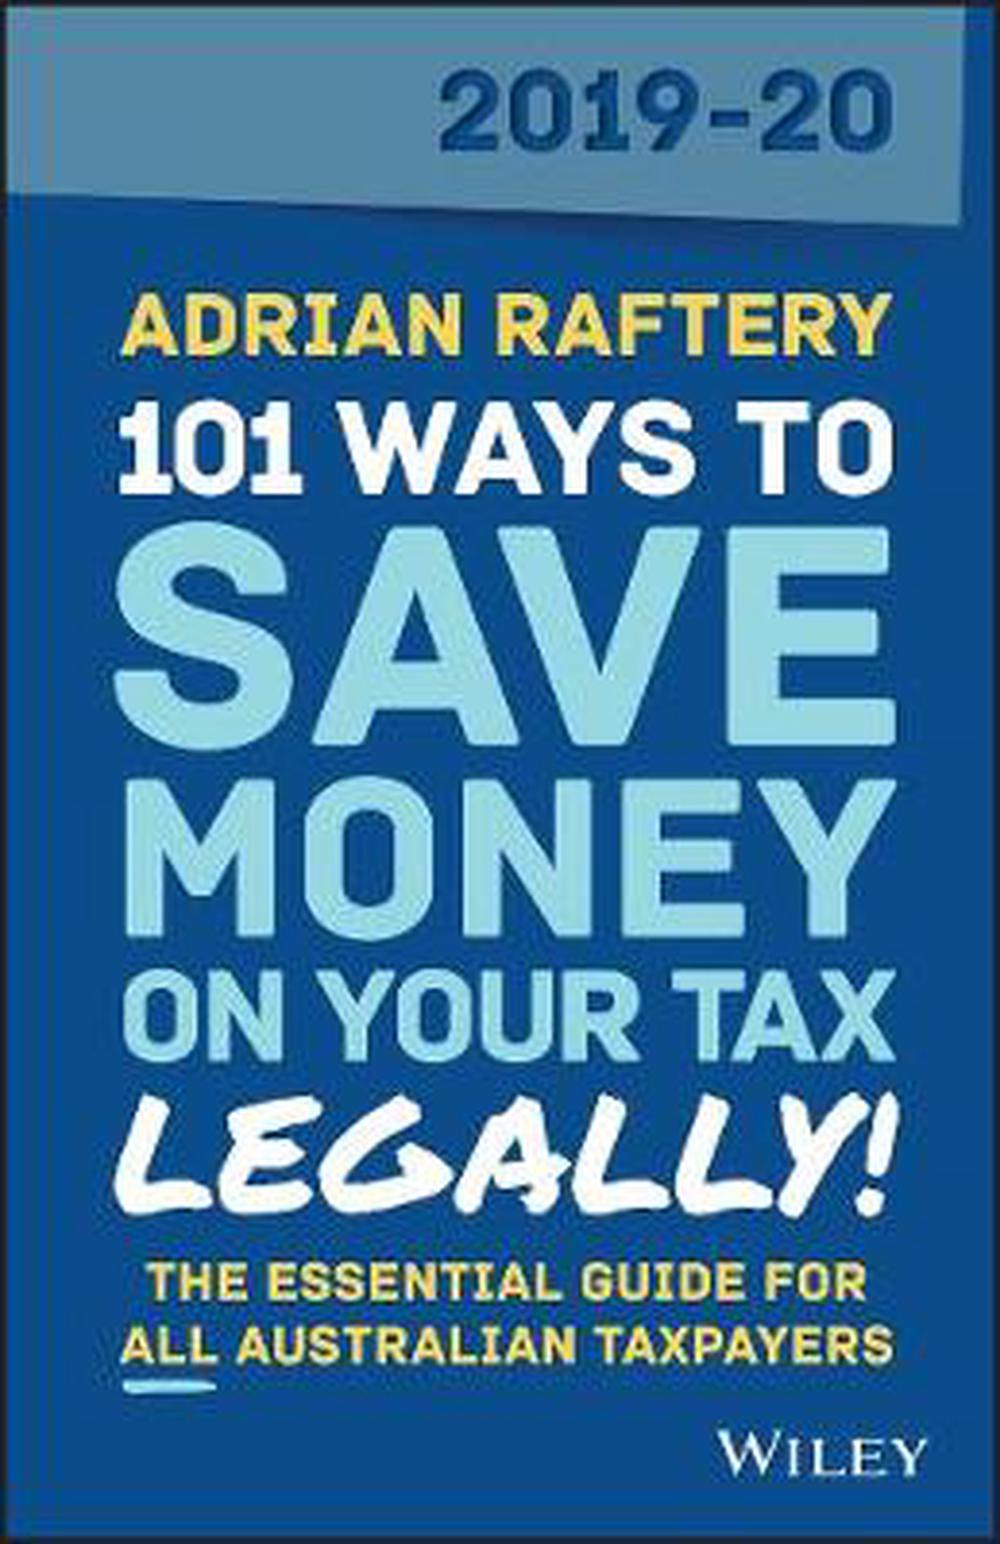 101 Ways to Save Money on Your Tax Legally! 20192020 by Adrian